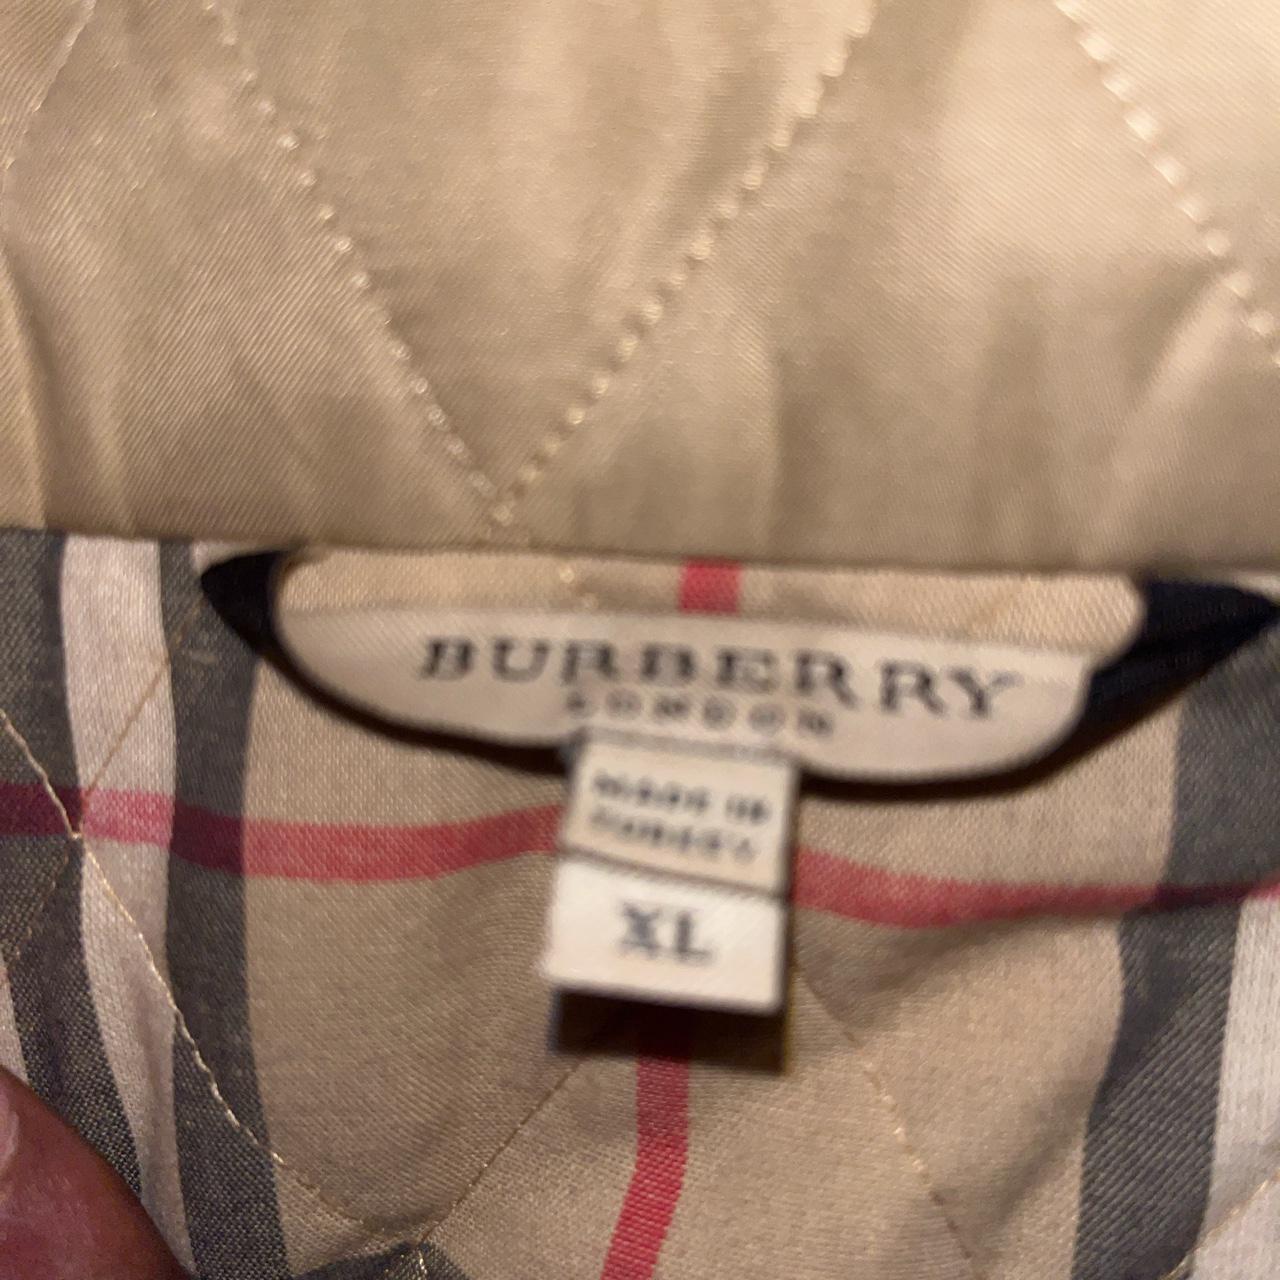 Burberry Trench Tag, Label on an authentic Burberry mac tre…